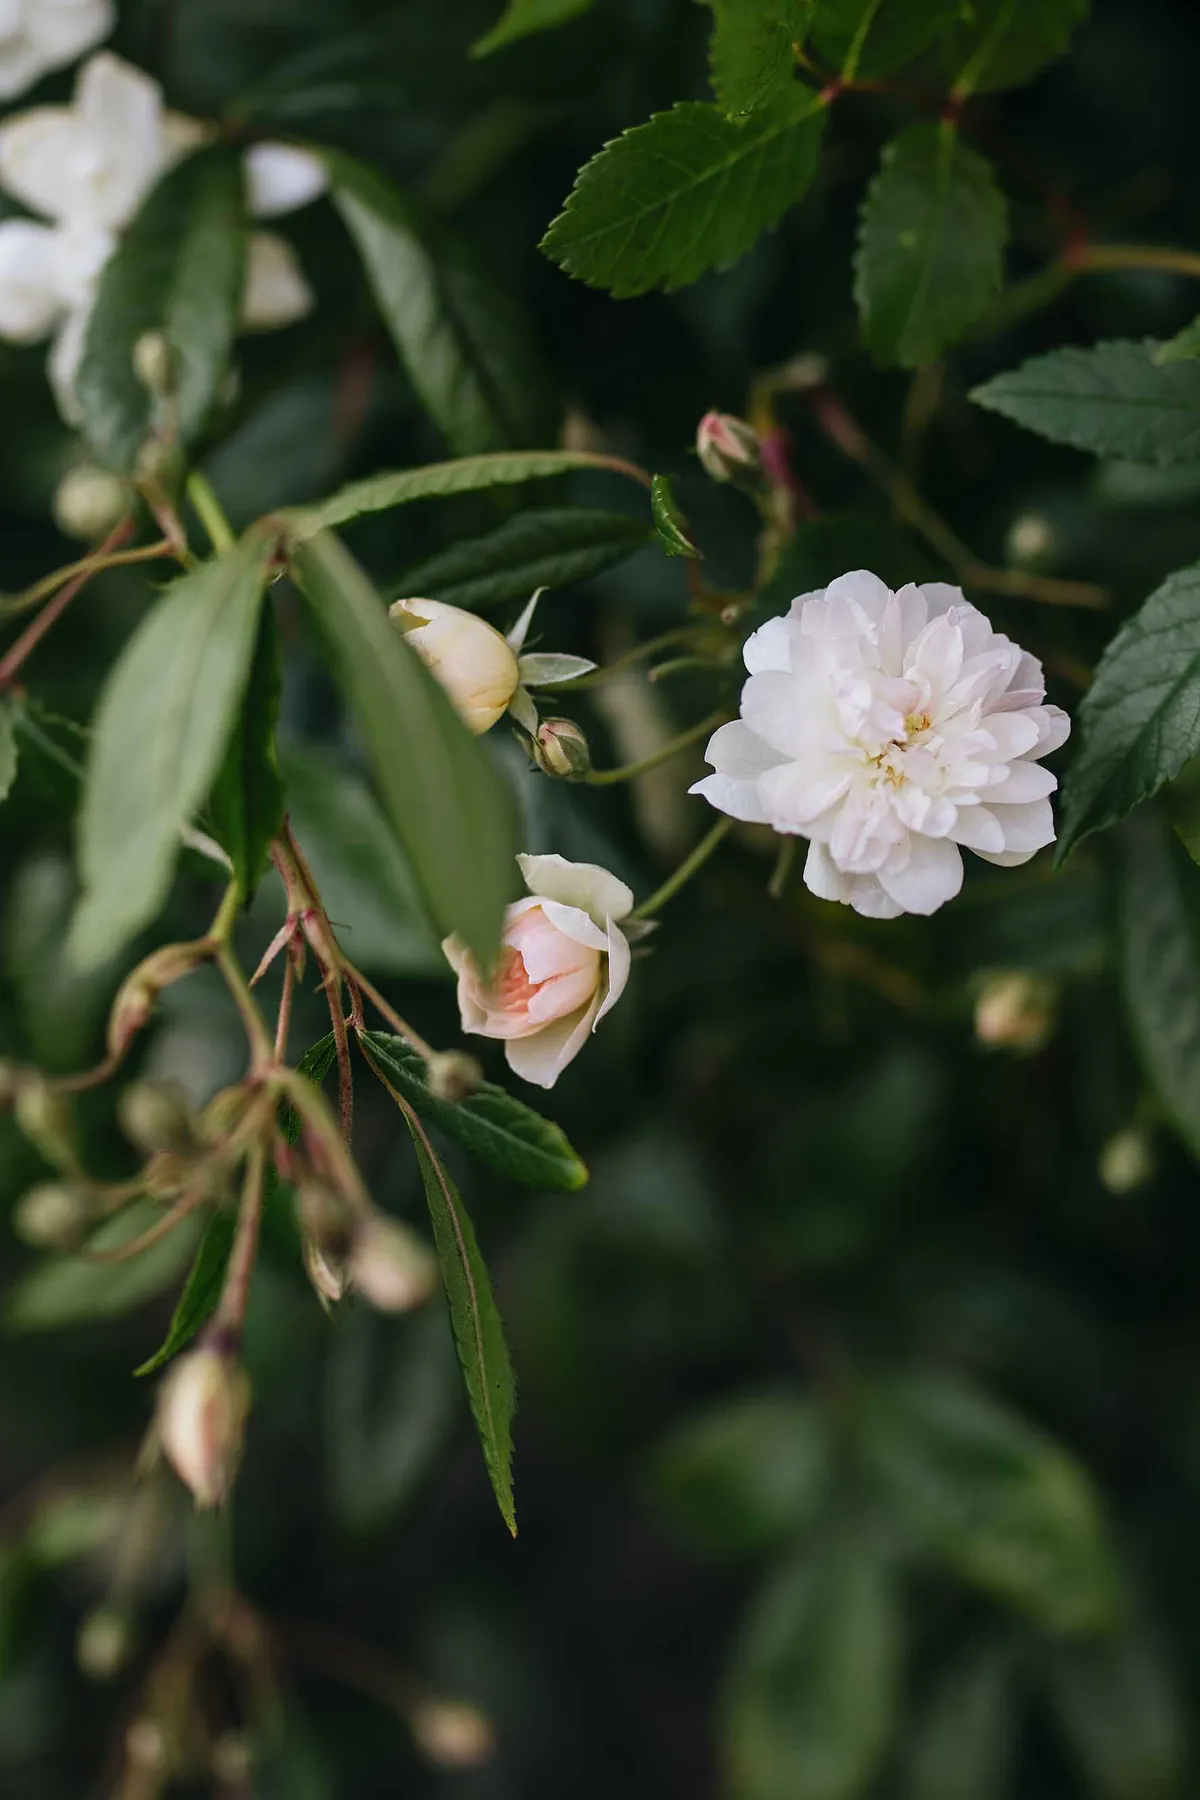 Rosa Snow Goose (= ‘Auspom’) is a repeat-flowering, English rambling rose bred by David Austin with dainty sprays of small, white flowers and a light musk scent.